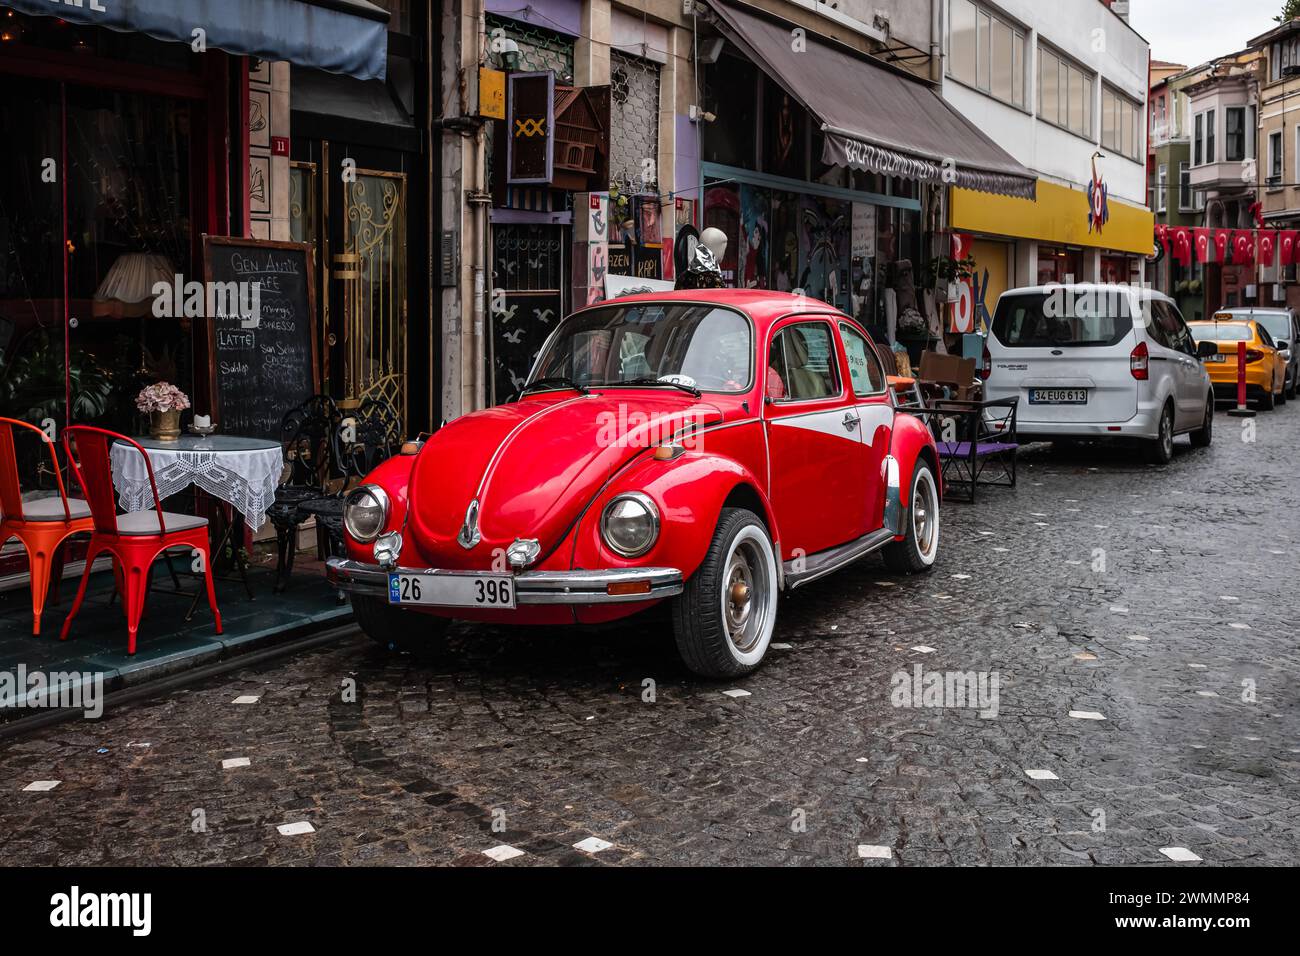 Red old car in the streets of Istanbul Turkey. Classic vintage car parked in the old city. Red car on the empty urban street in a cloudy day. Street v Stock Photo